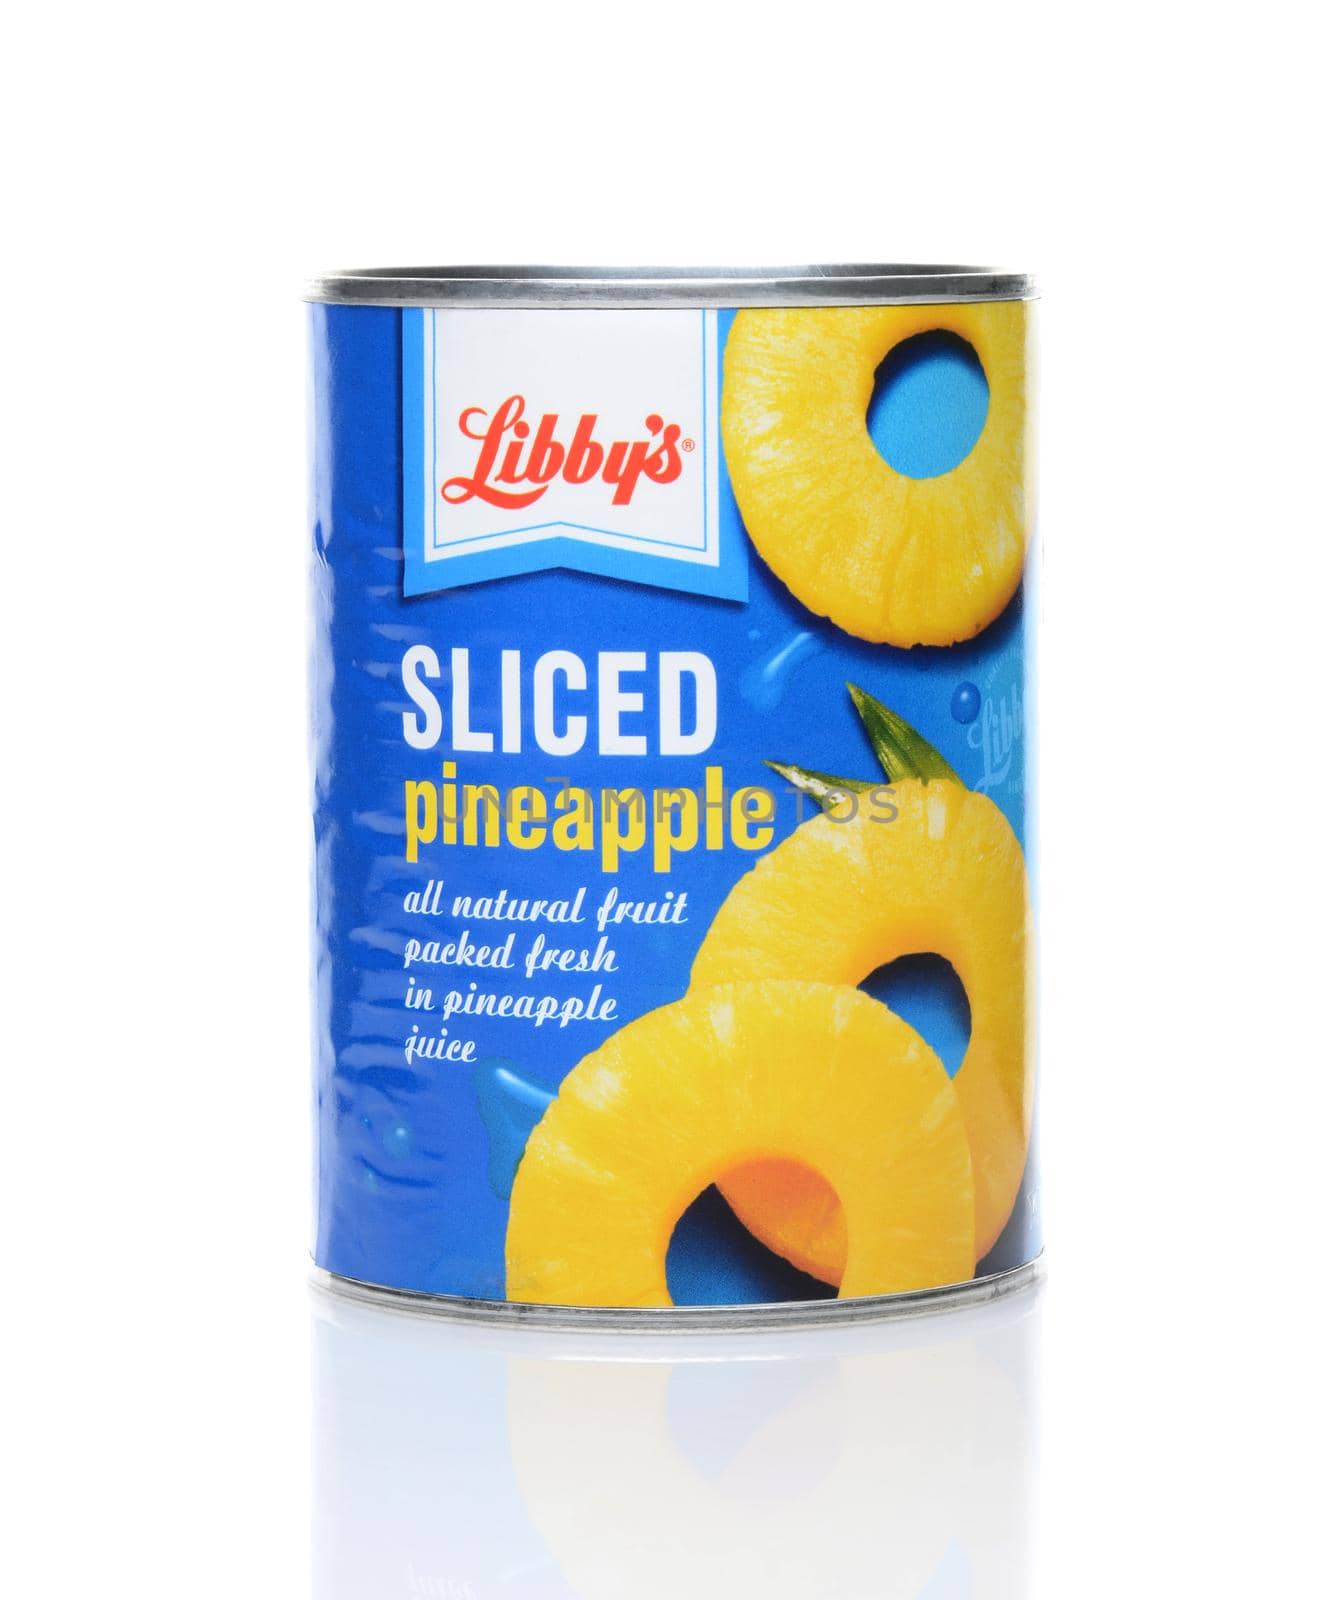 IRVINE, CA - JUNE 23, 2014: A can of Libby's Sliced Pineapple. Libby's, founded in 1869, is a U.S. based food company known for its canned food.